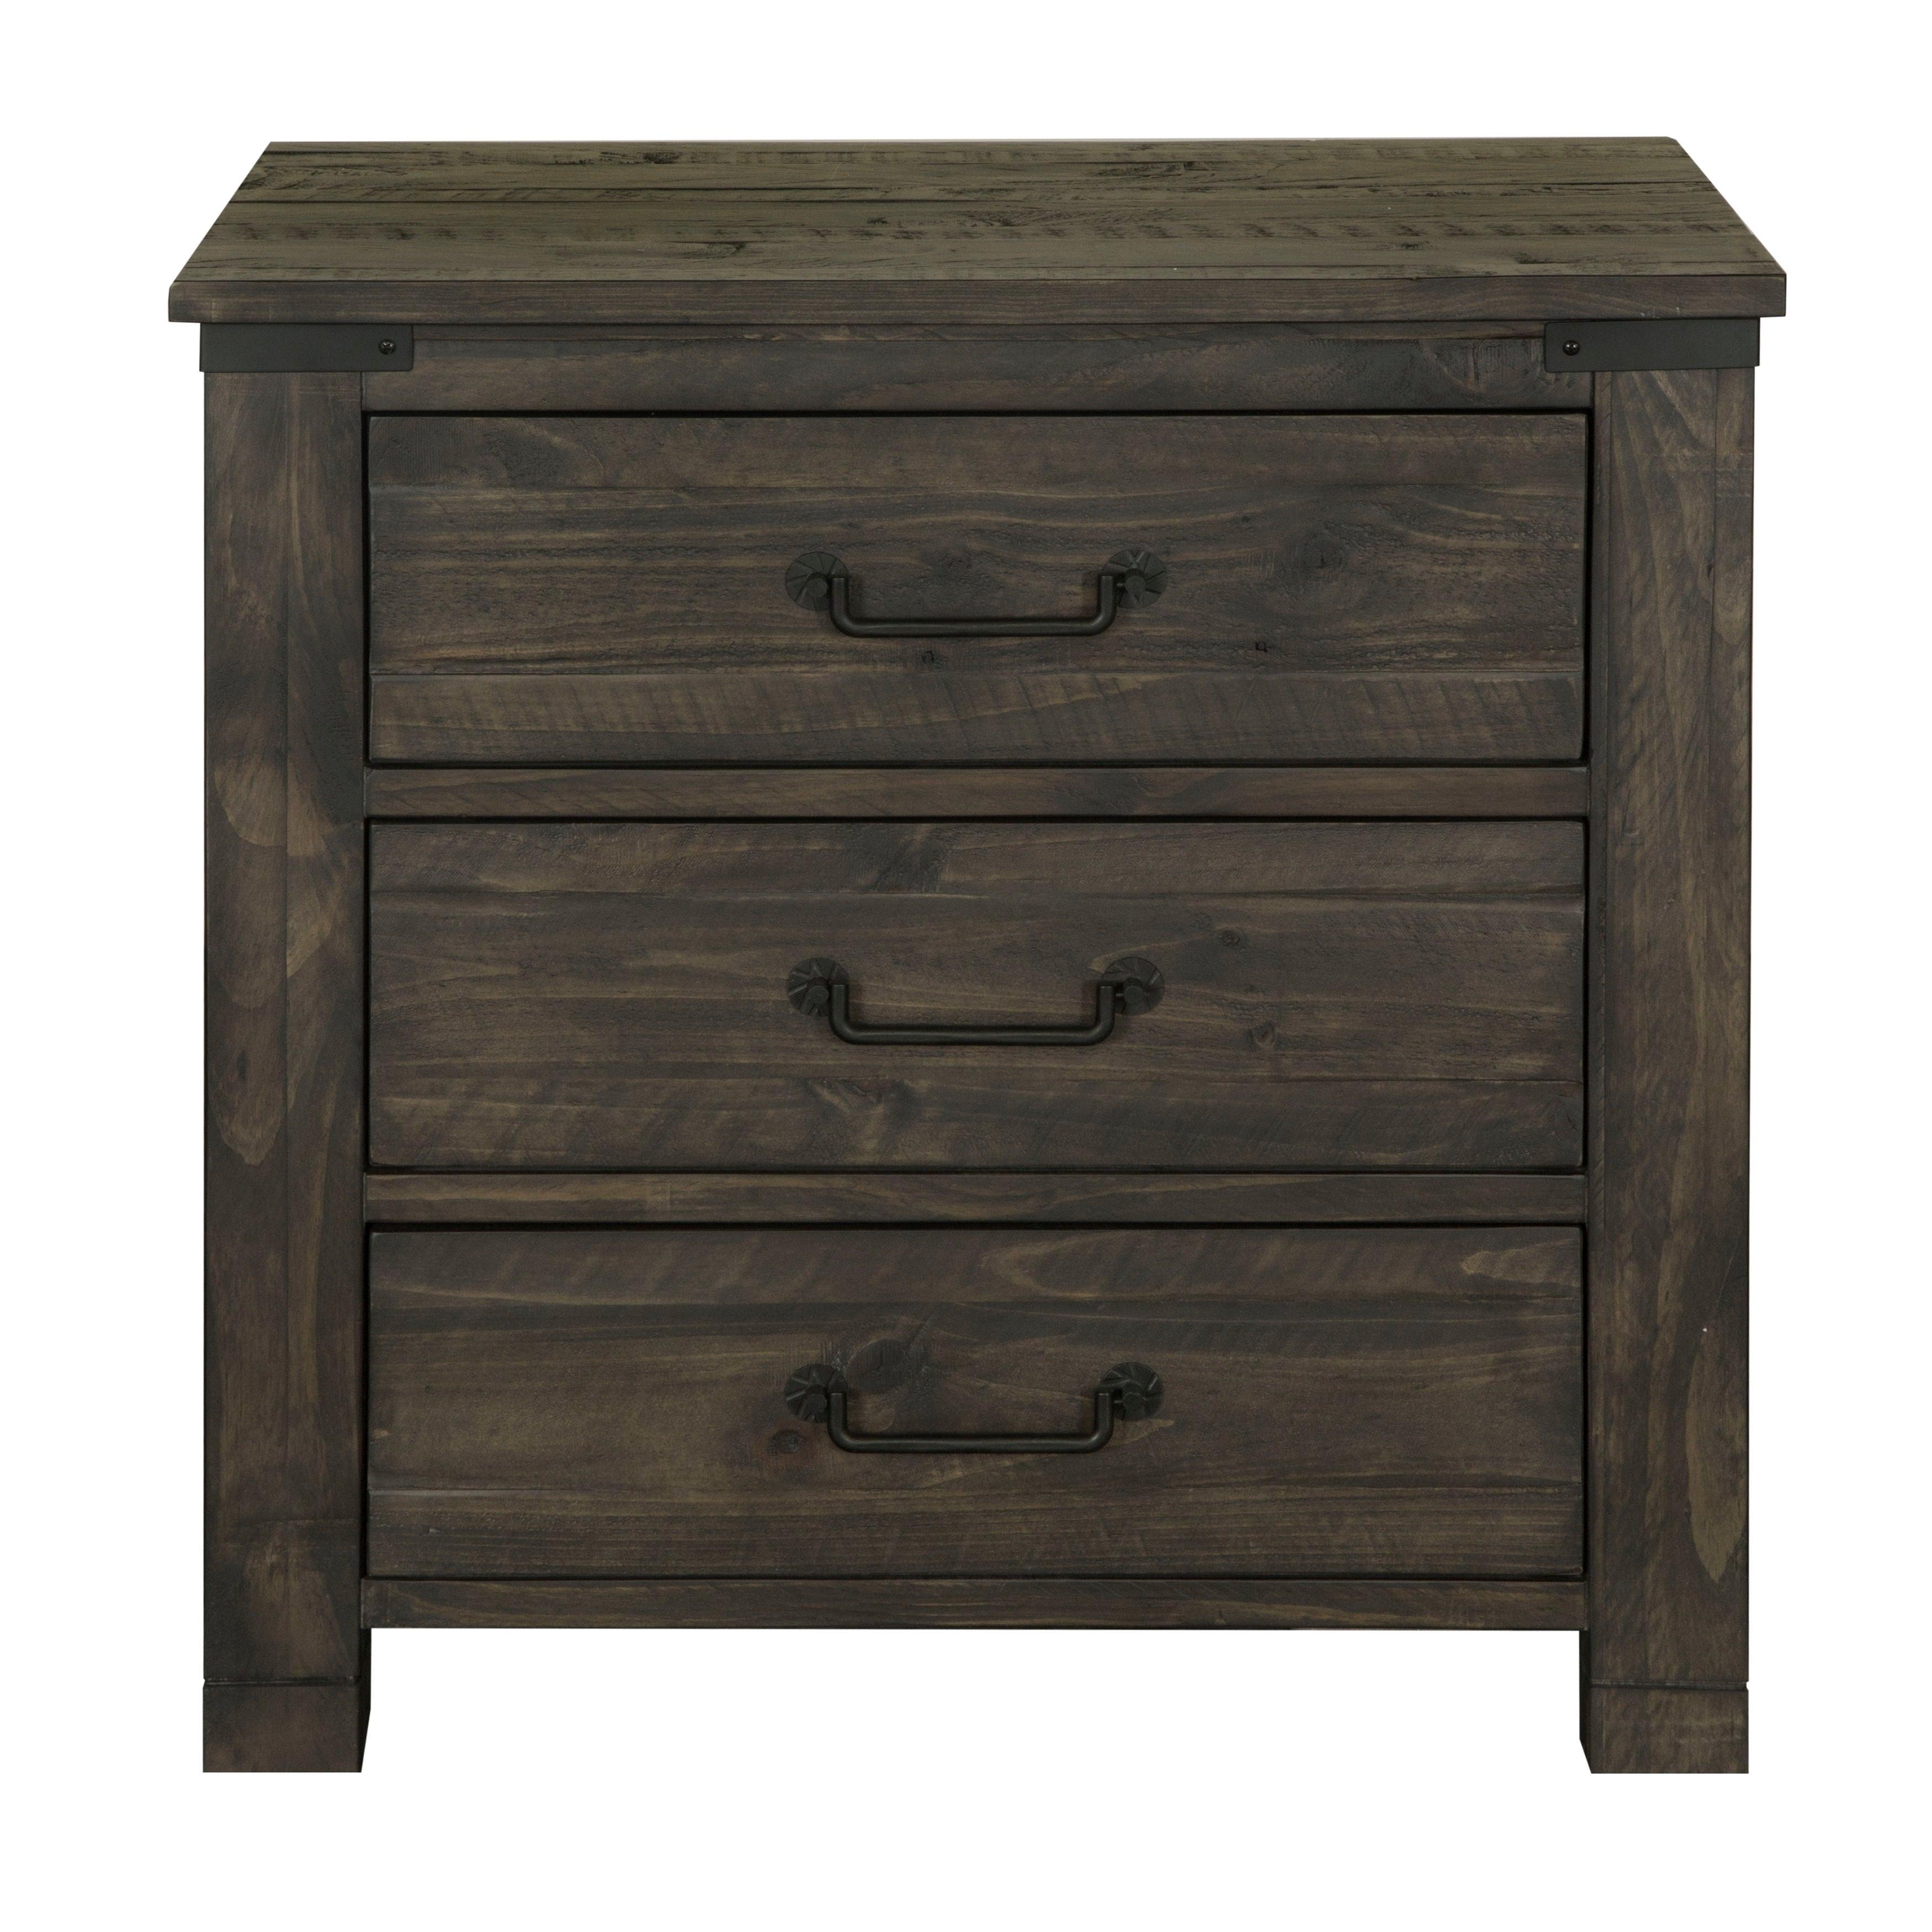 Magnussen Furniture - Abington - 3 Drawer Nightstand - Weathered Charcoal - 5th Avenue Furniture